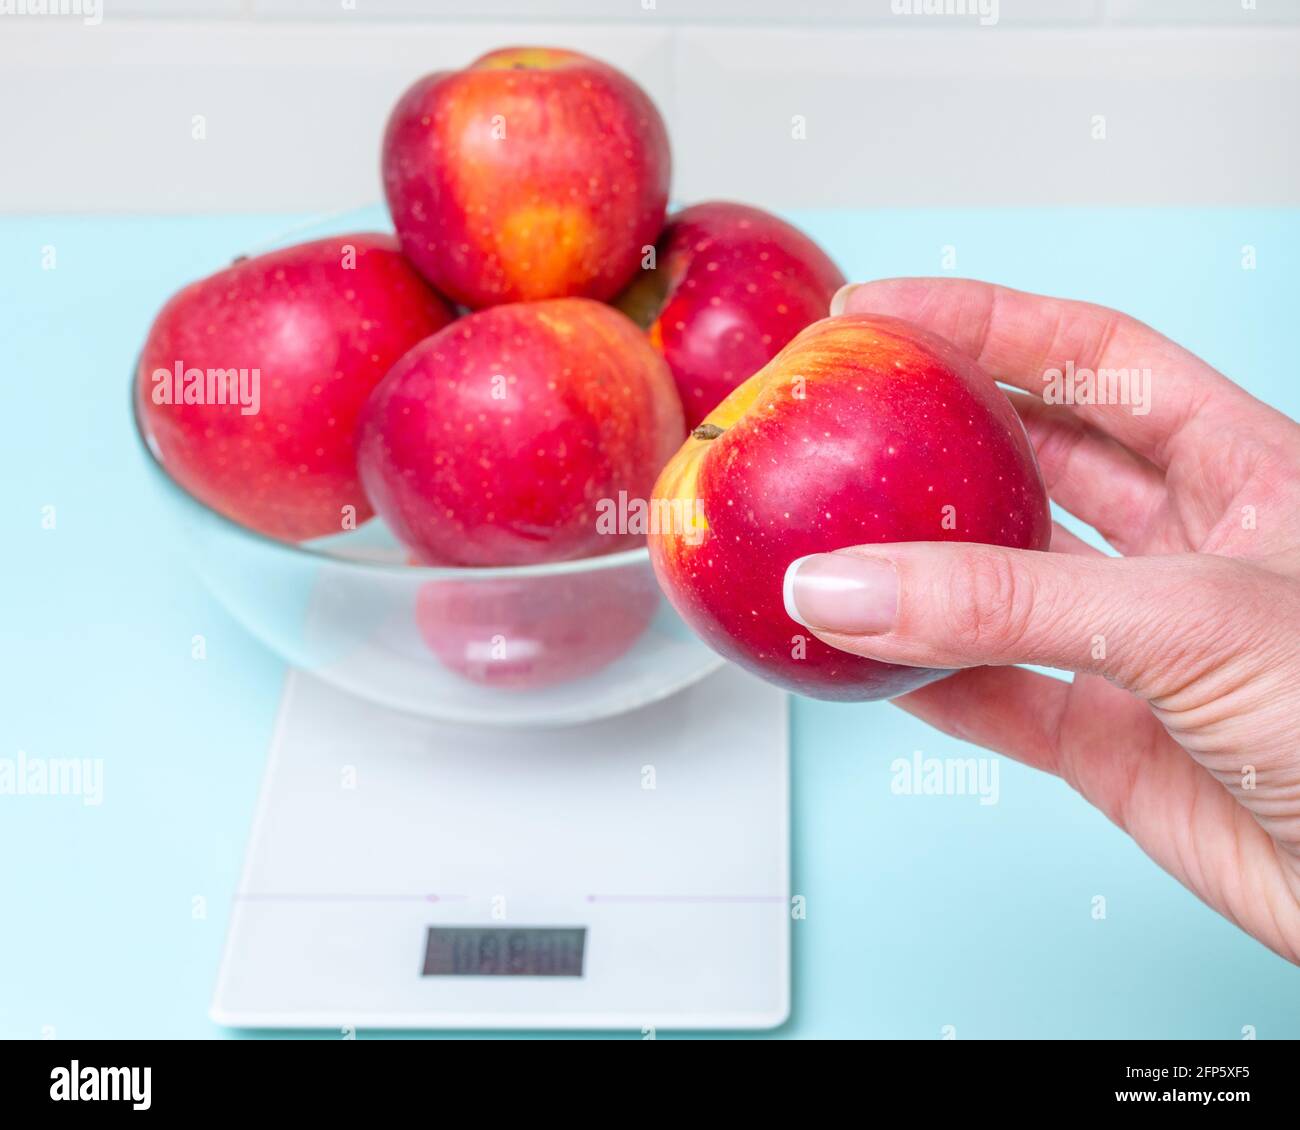 three apples lying on weight scale Stock Photo - Alamy